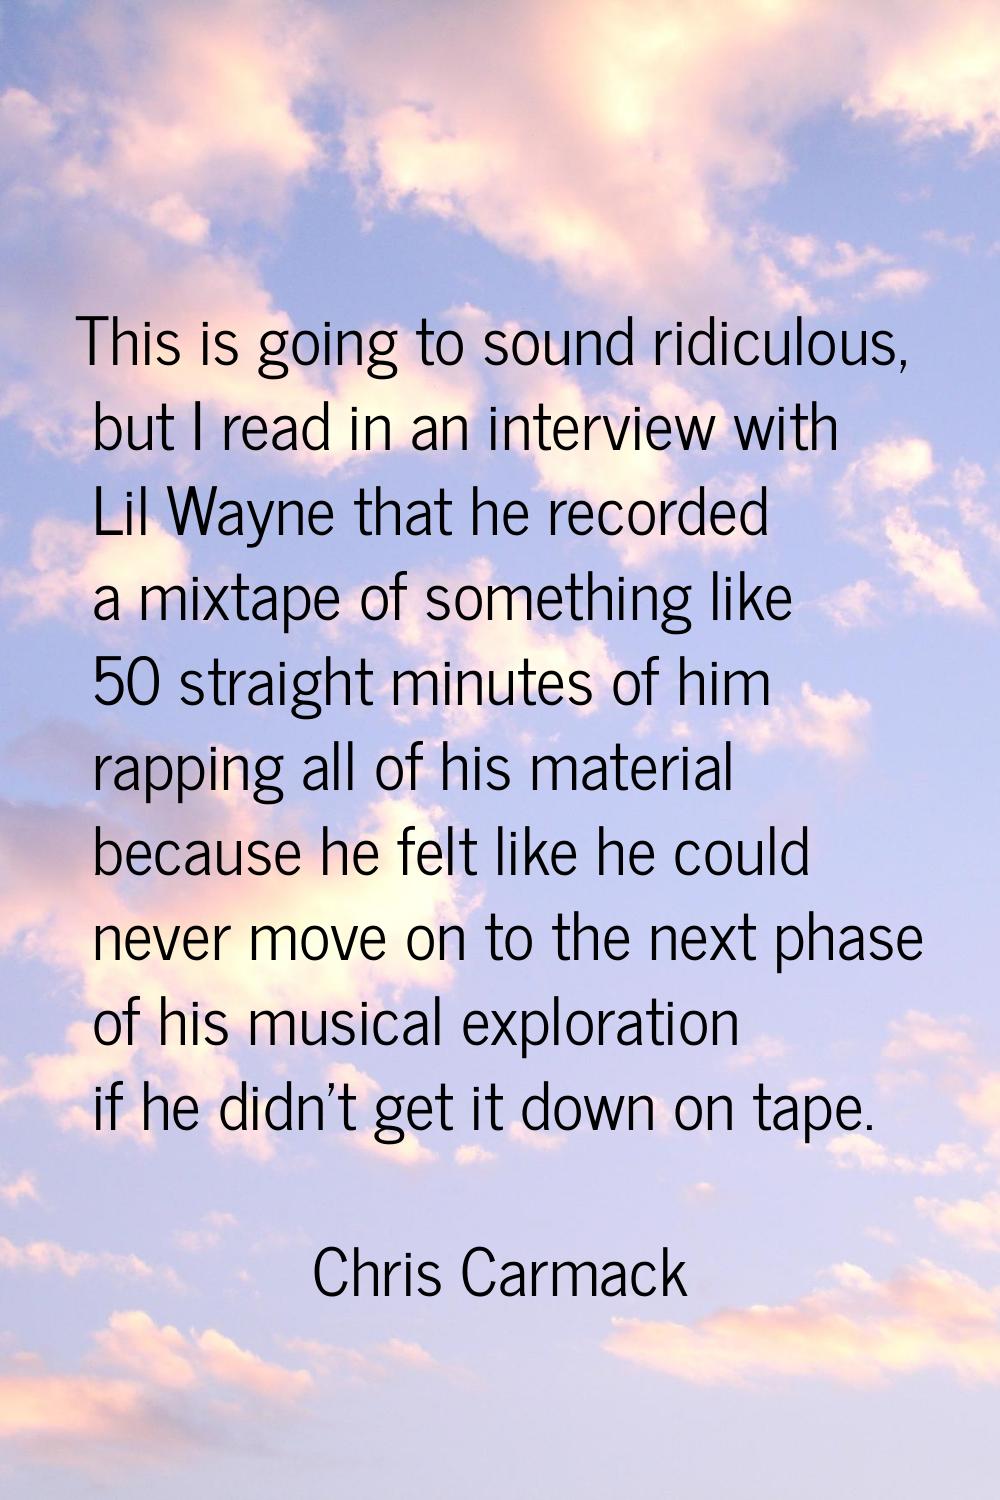 This is going to sound ridiculous, but I read in an interview with Lil Wayne that he recorded a mix